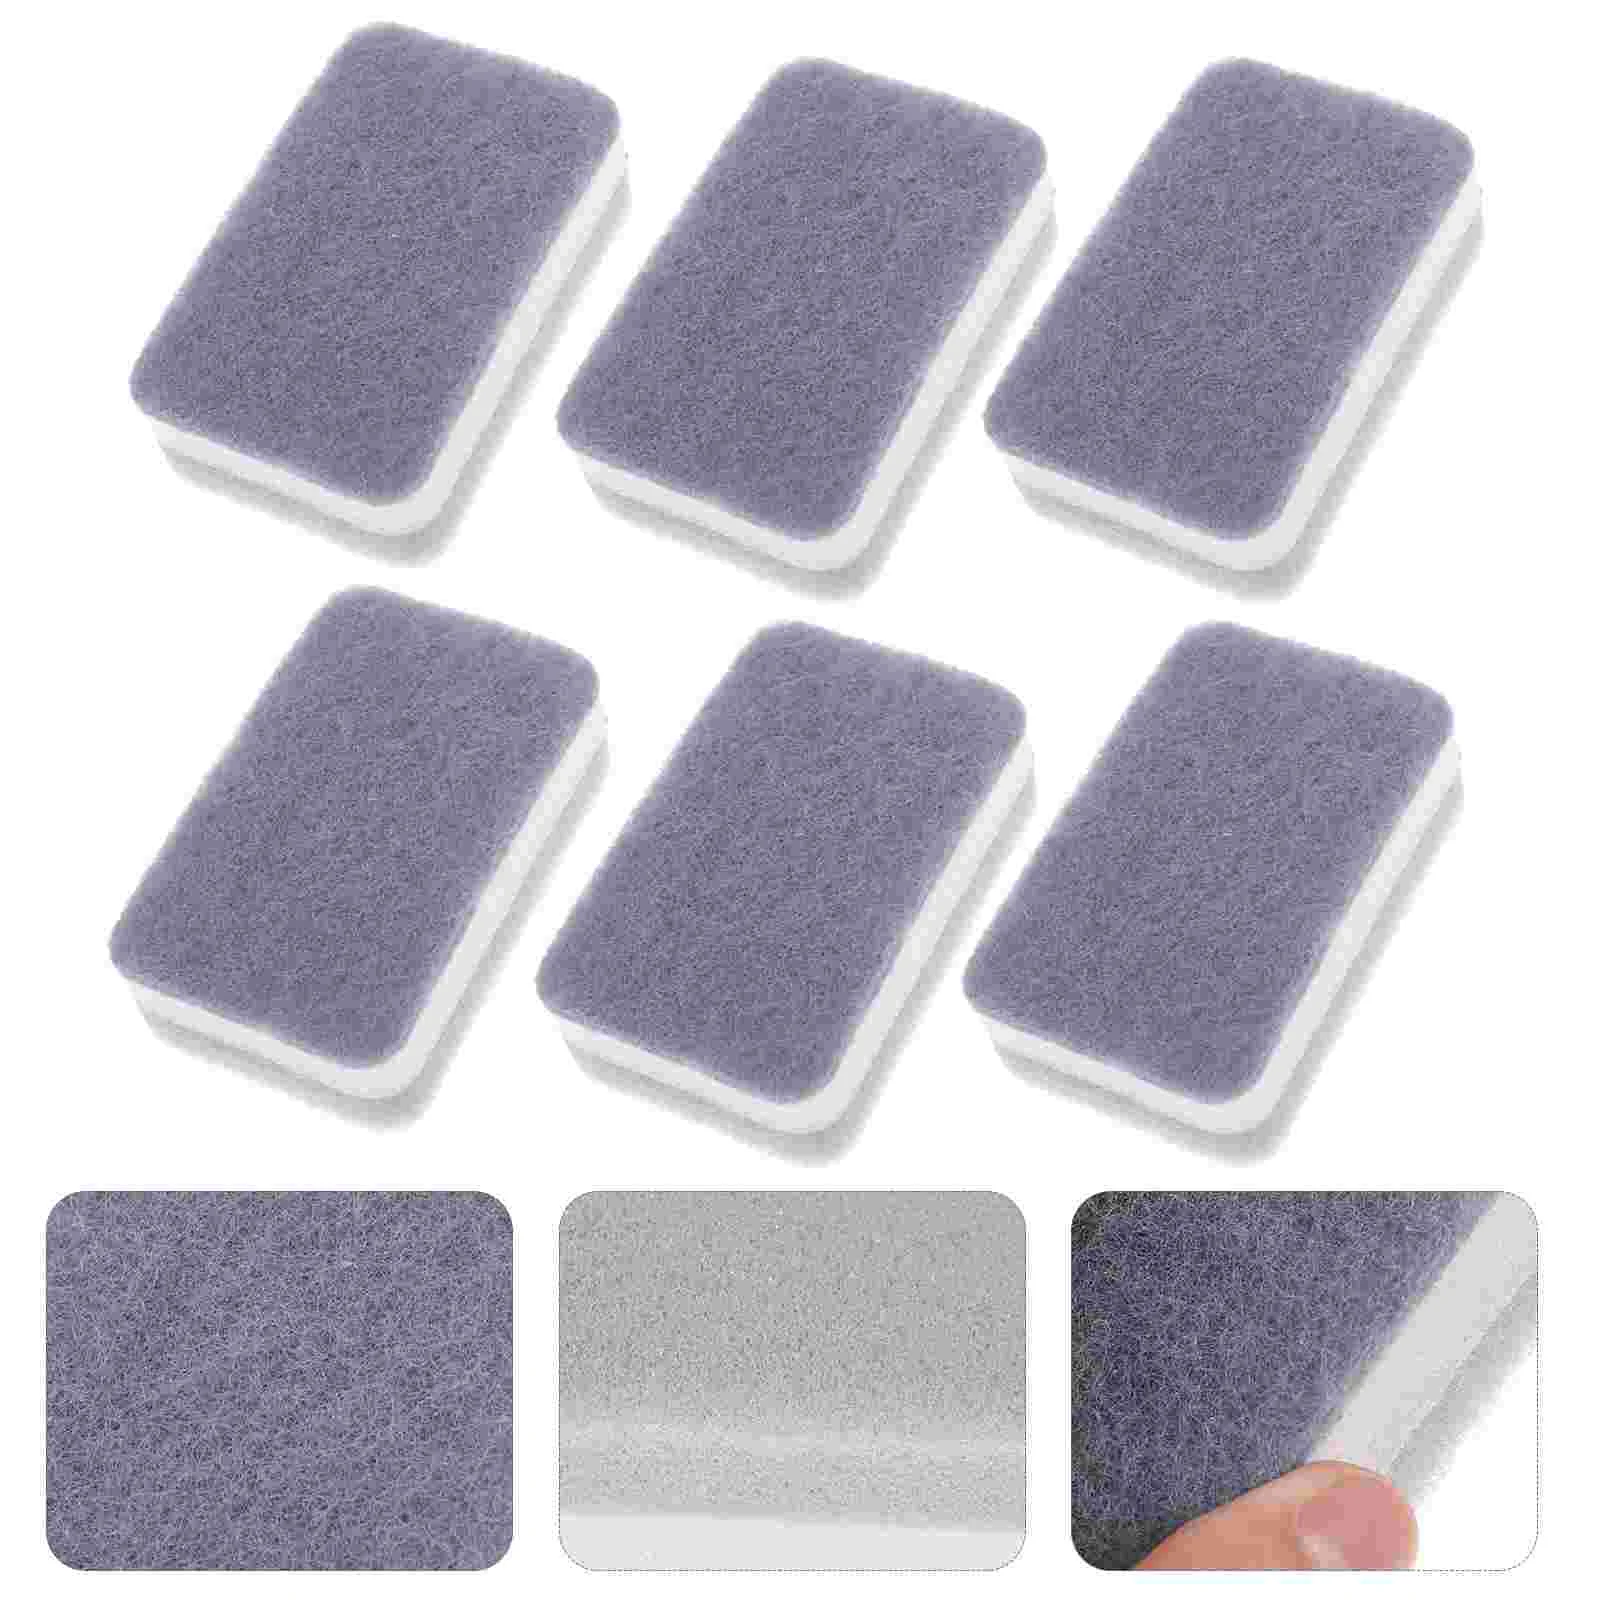 

Three-Layer Scouring Sponge Scrub Pad Multi-functional Reuseable Kitchen Pads Reusable Dishwashing for Towels